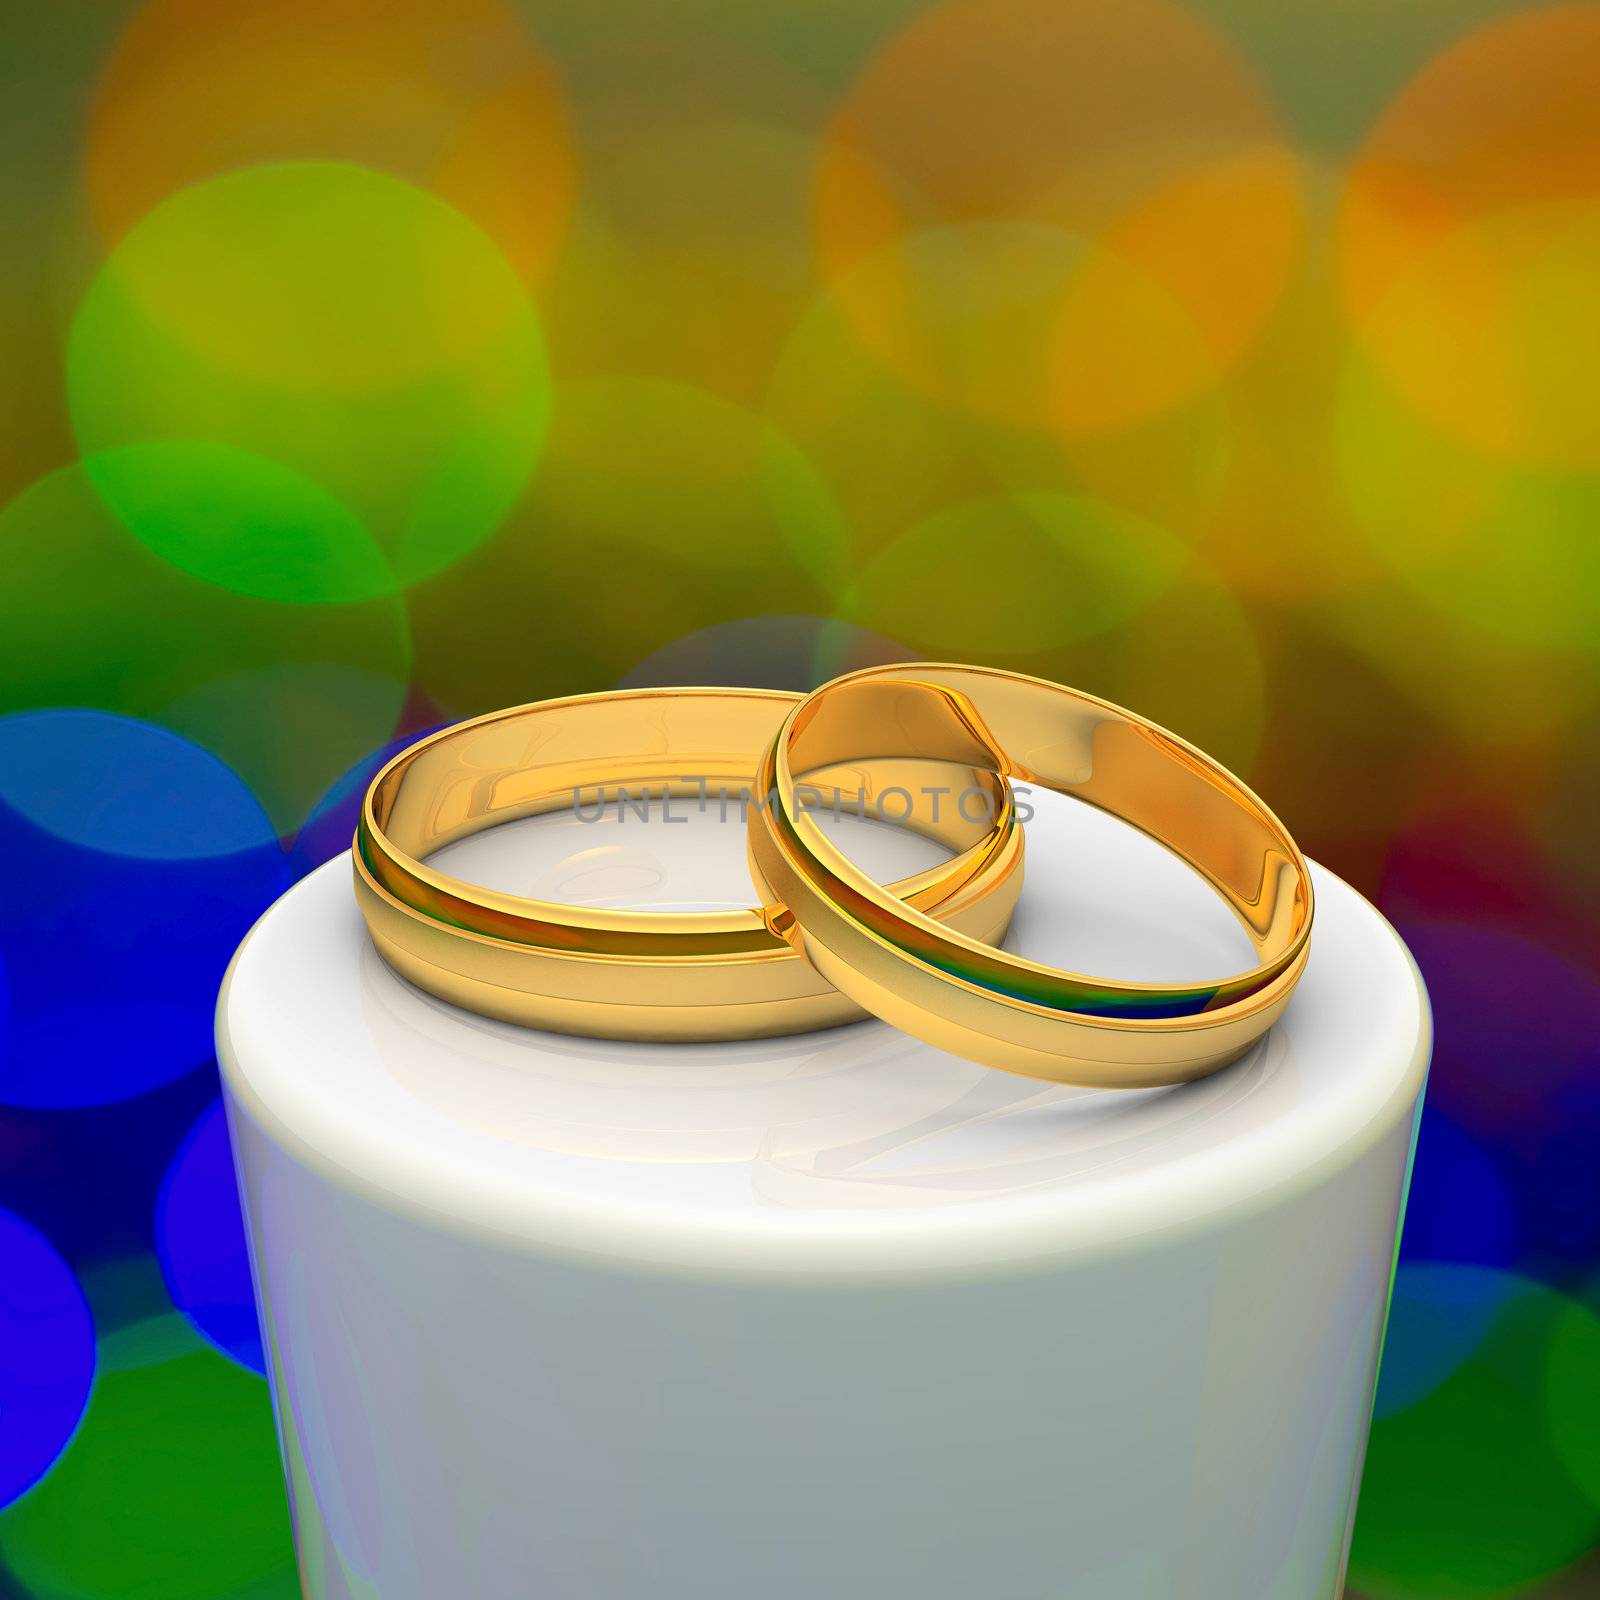 Two gold wedding rings on the podium 